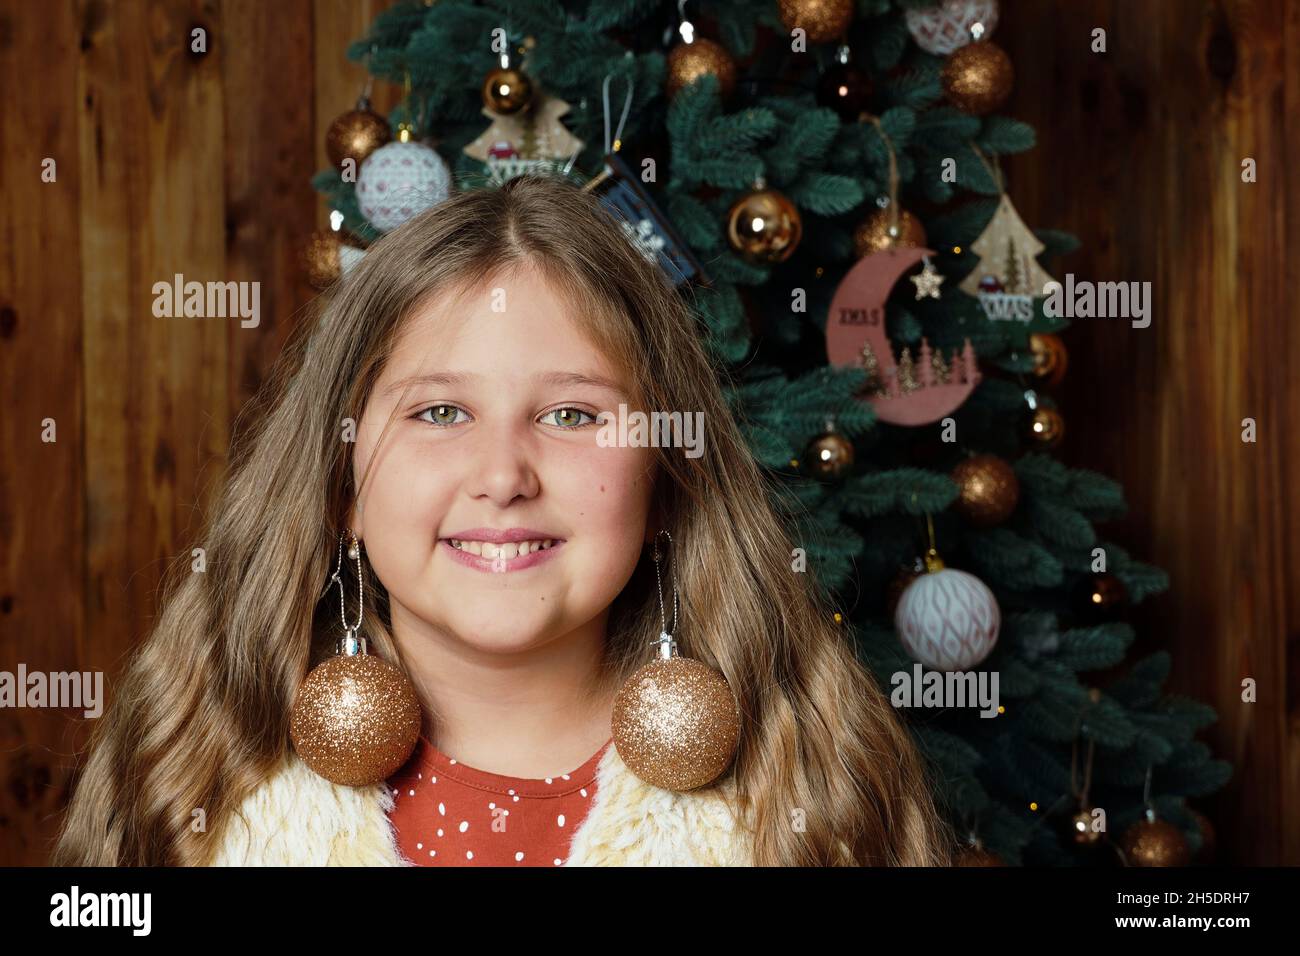 Young happy funny smiling long haired girl on decorated Christmas tree background.. Girl at Xmas. Rustic concept. Humor. Stock Photo